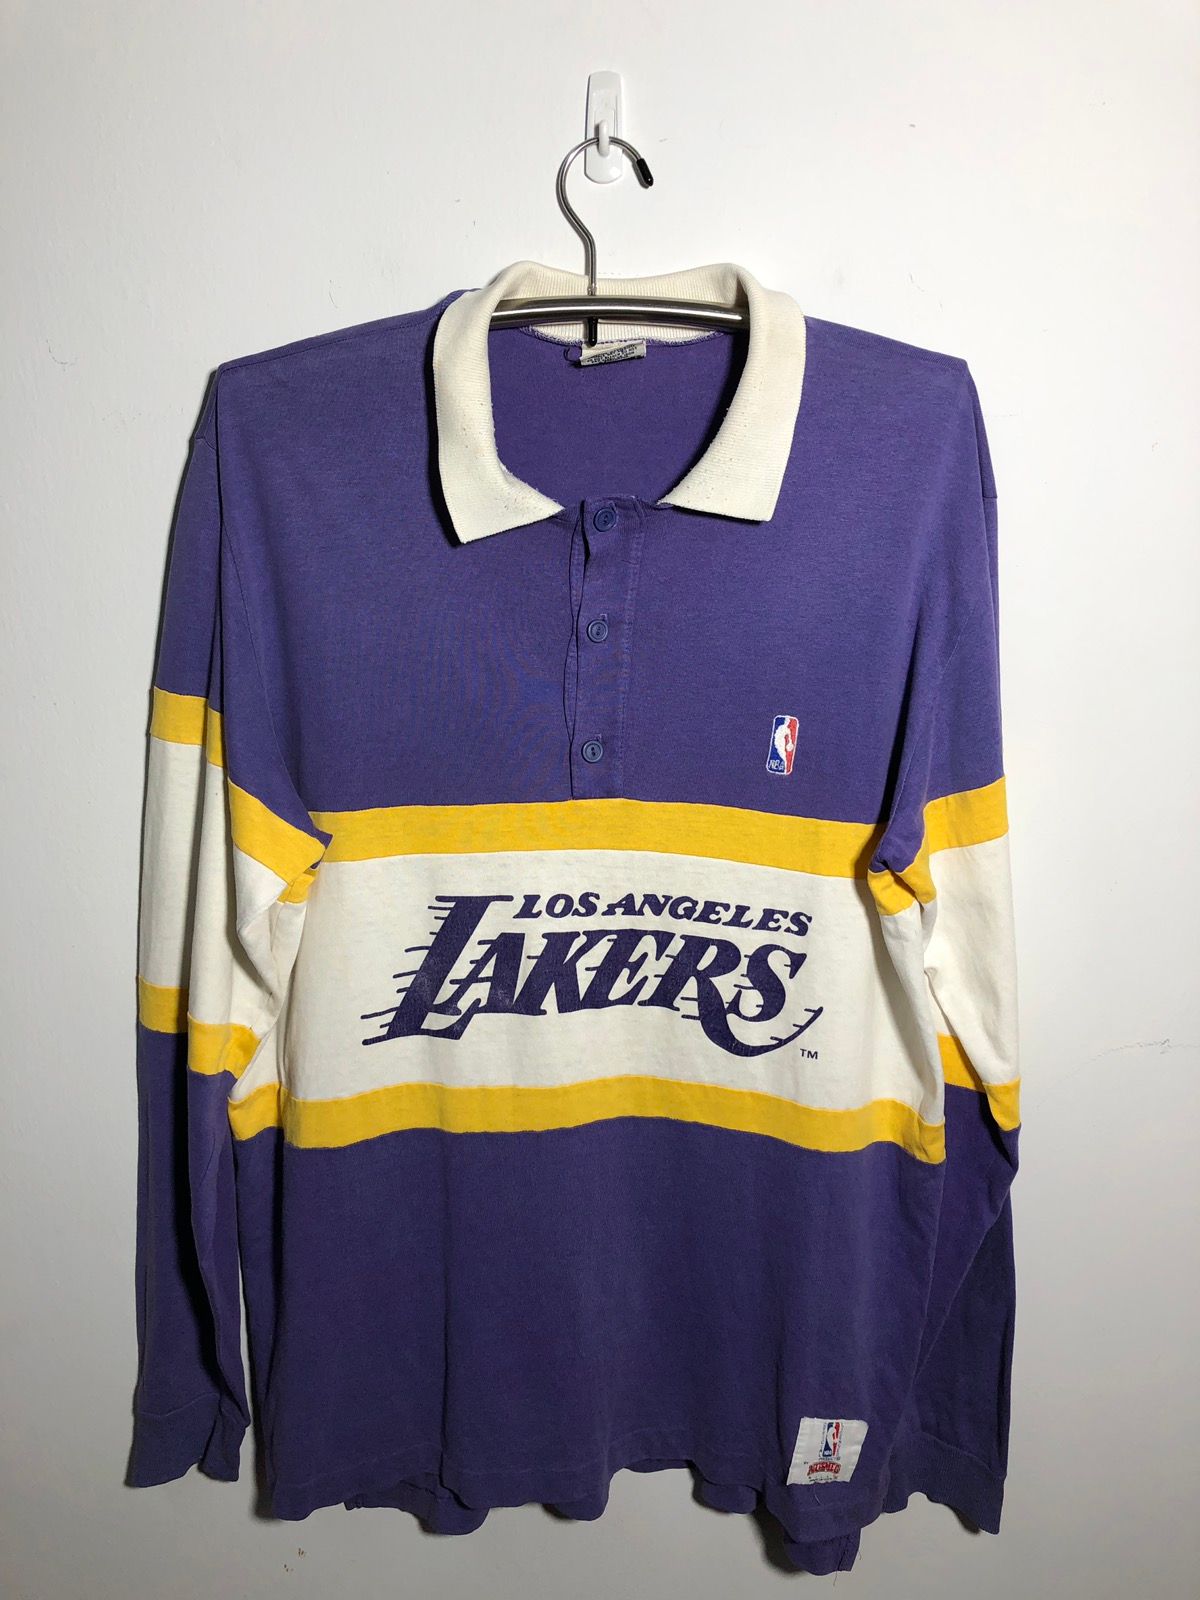 Vintage Vintage Los Angeles Lakers polo T Shirt NBA Basketball Player Trainer 1990s Size US XL / EU 56 / 4 - 1 Preview